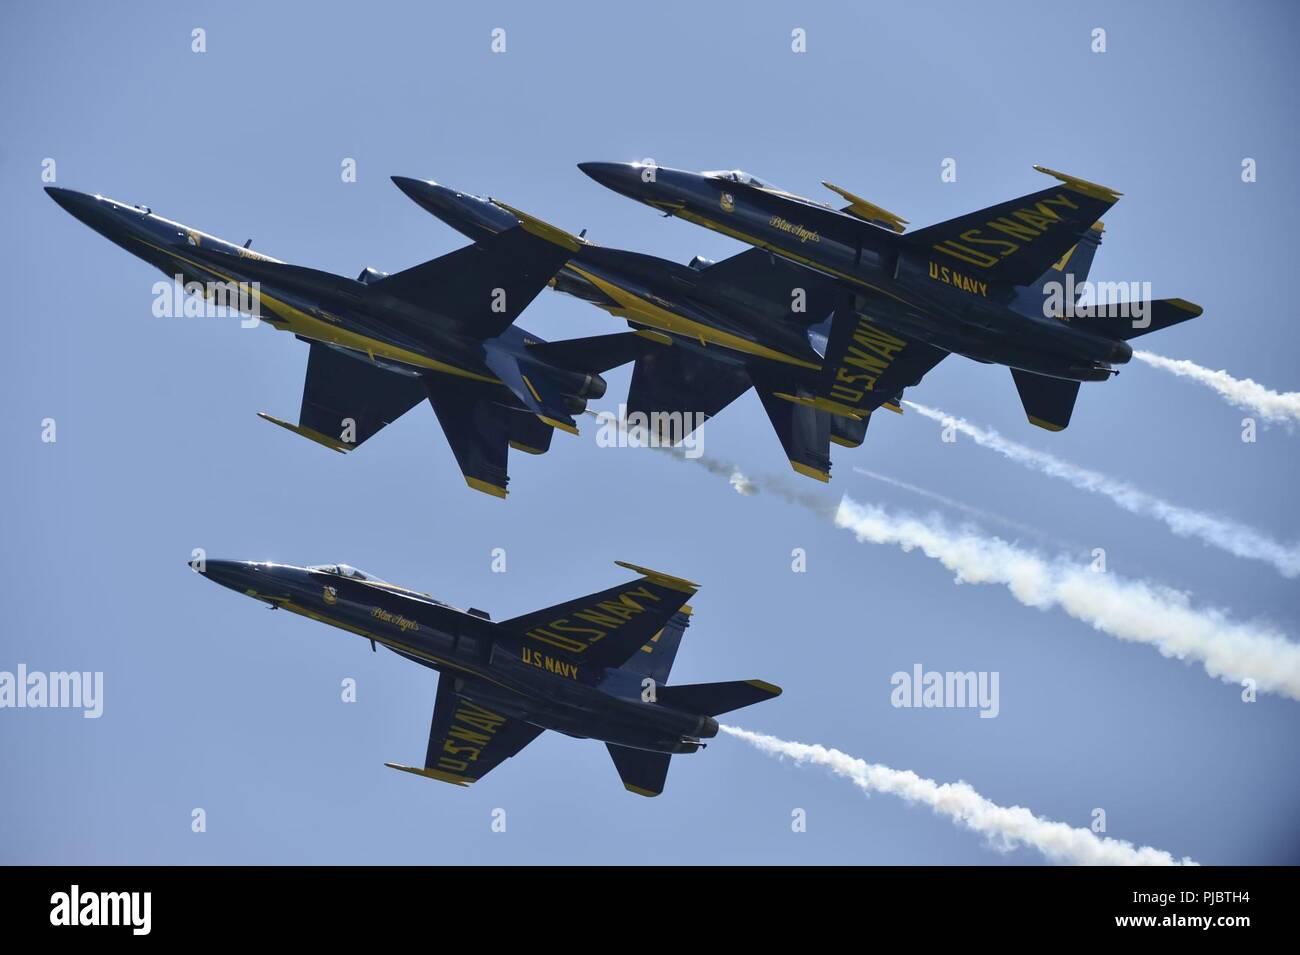 PENSACOLA BEACH, Fla. (July 13, 2018)   The U.S. Navy flight demonstration squadron, the Blue Angels, perform the Double Farvel during the 2018 Pensacola Beach Air Show. The Blue Angels are scheduled to perform more than 60 demonstrations at more than 30 locations across the U.S. and Canada in 2018. Stock Photo